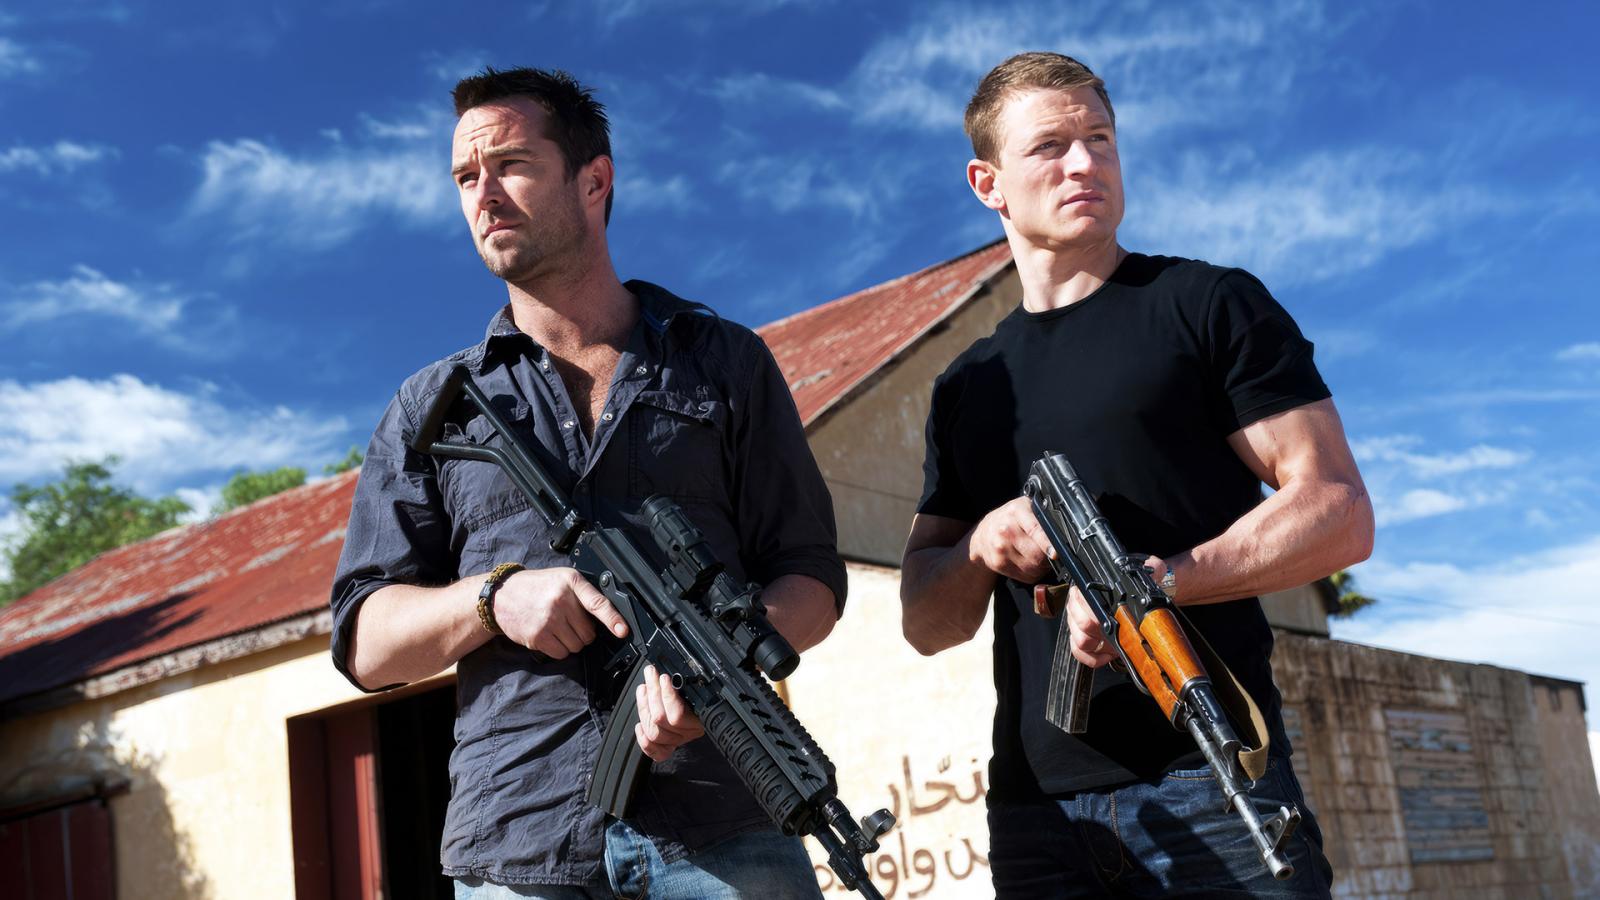 Edge-of-Your-Seat Excitement: 10 Action Series You Can't Miss - image 3